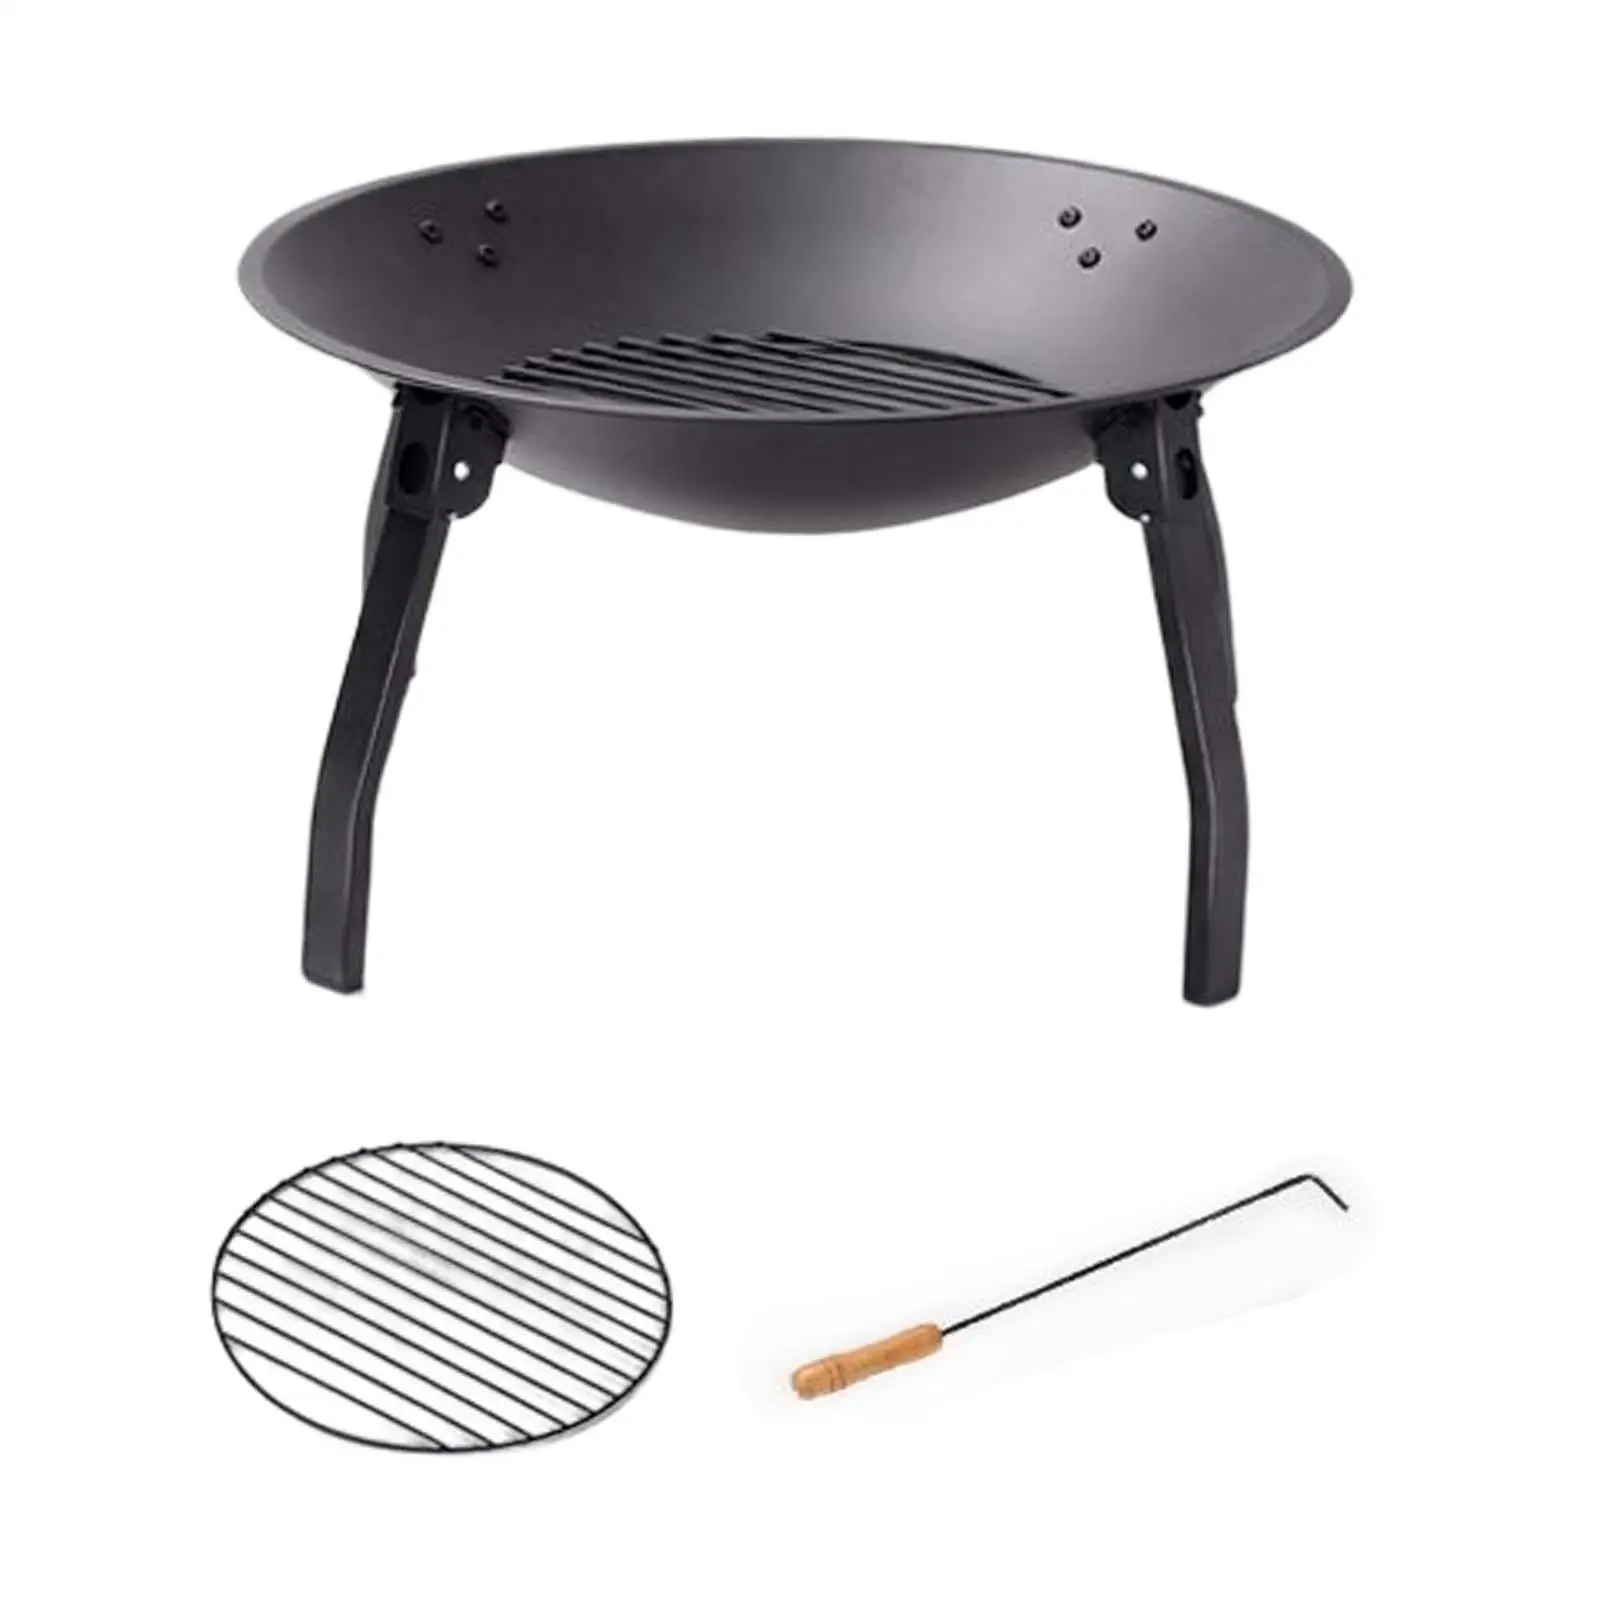 

Creative Portable Outdoor Brazier Foldable Cooking Utensil Campfire Firepit for Barbecue Outdoor Deck Patio BBQ